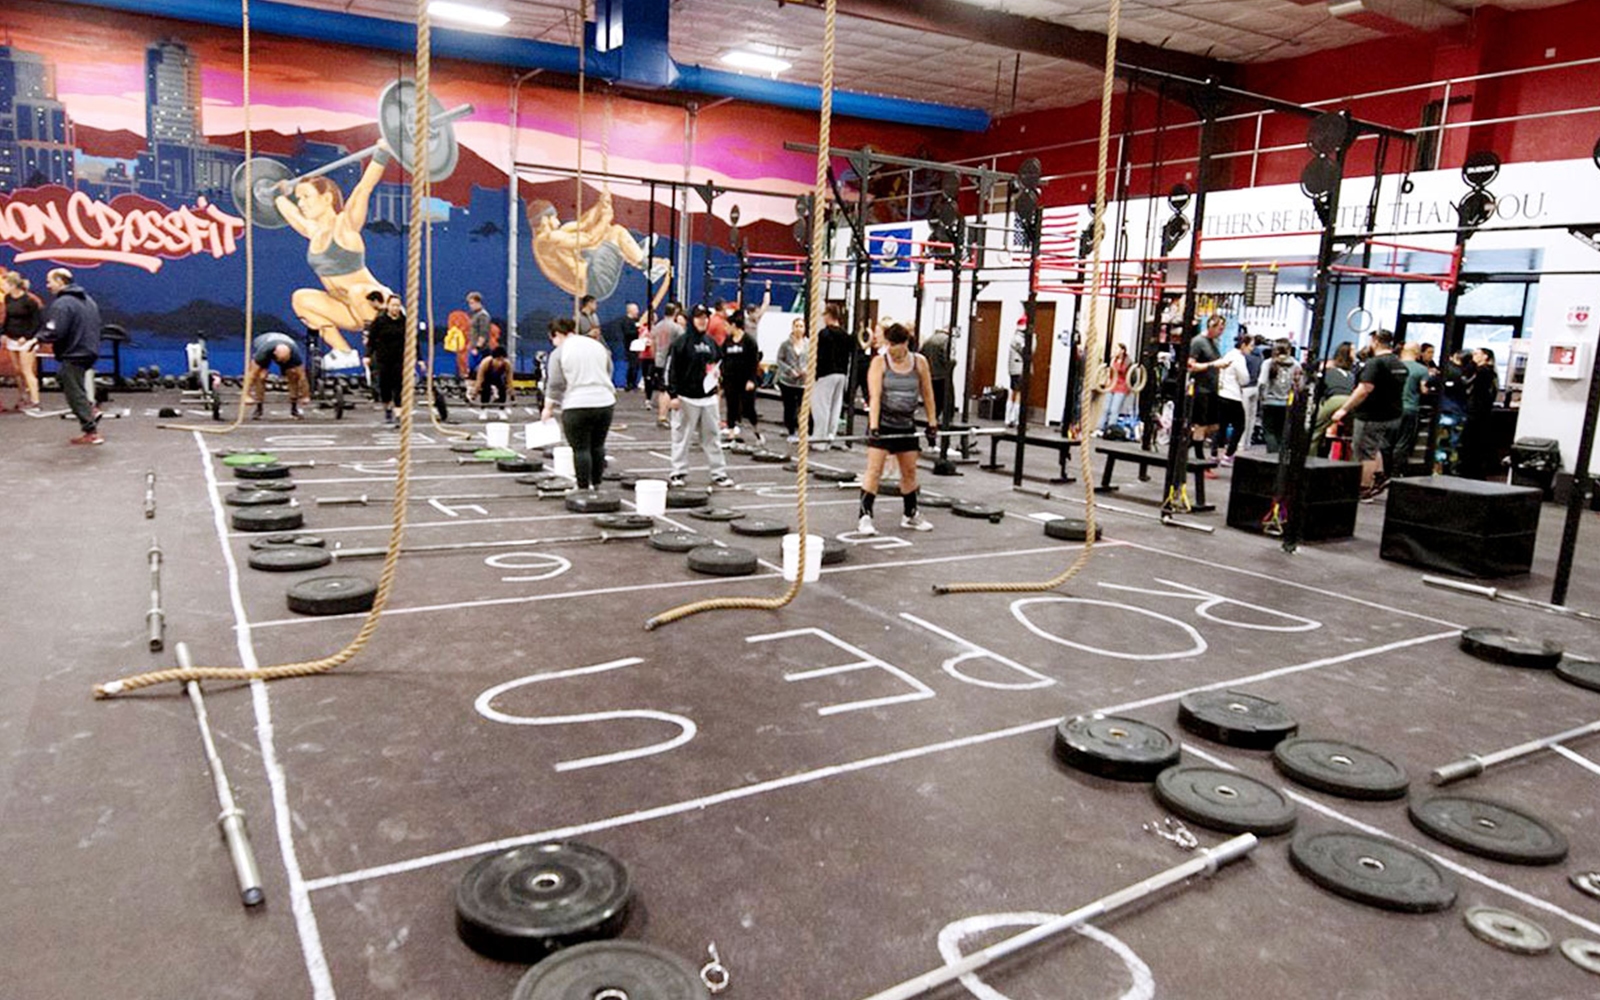 The best CrossFit gym solutions (as in the steel framed building pictured here) are custom tailored to your specific needs.